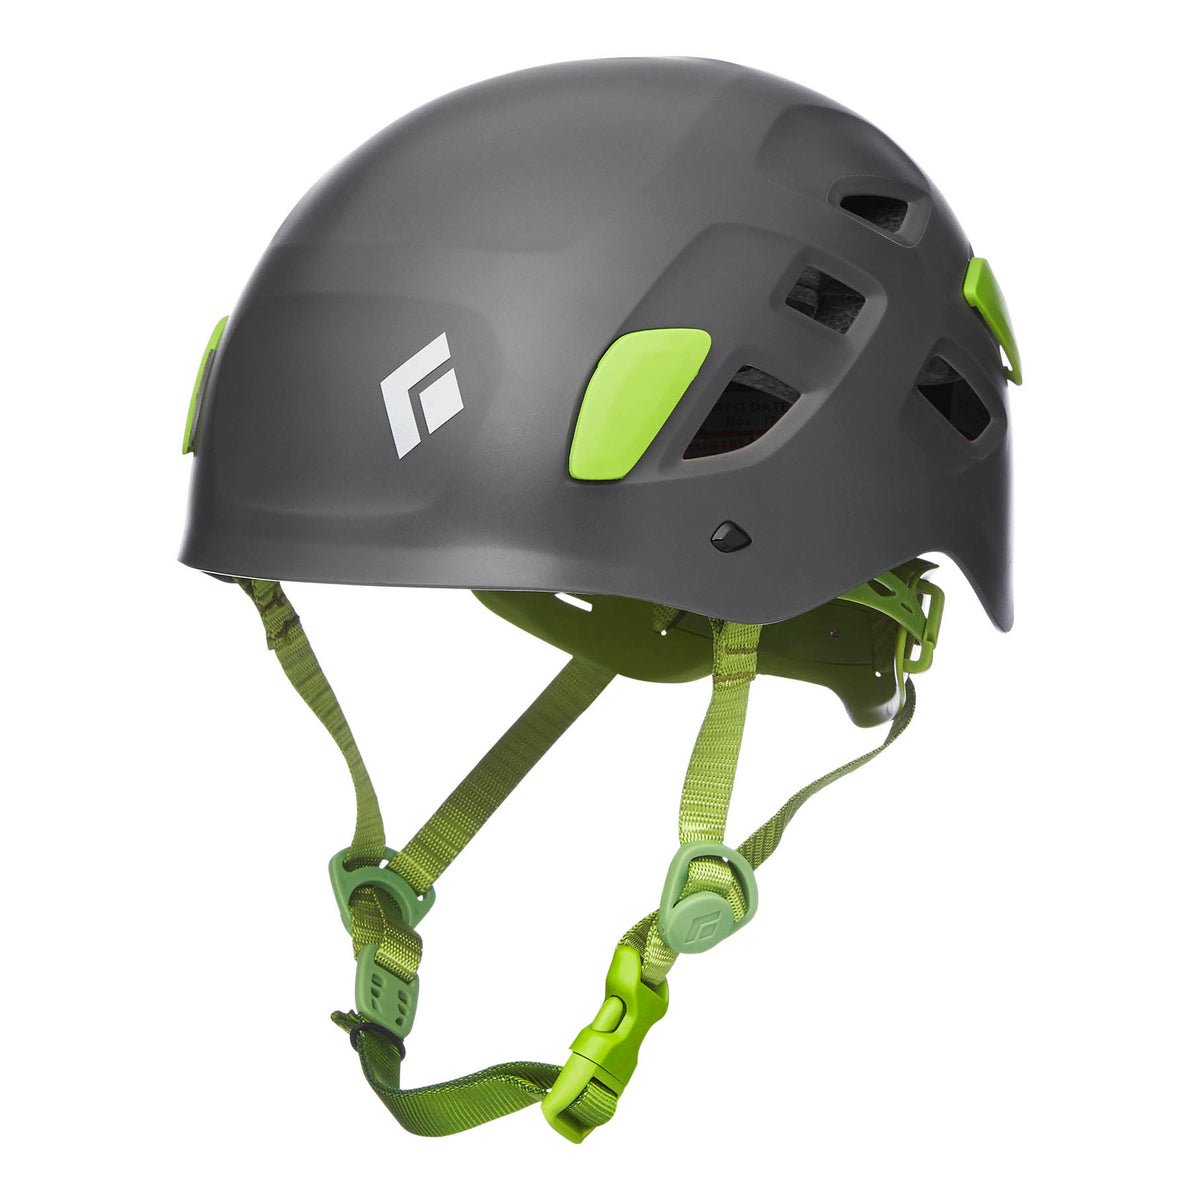 Black Diamond Half Dome climbing helmet, front/side view in grey colour with green chin strap